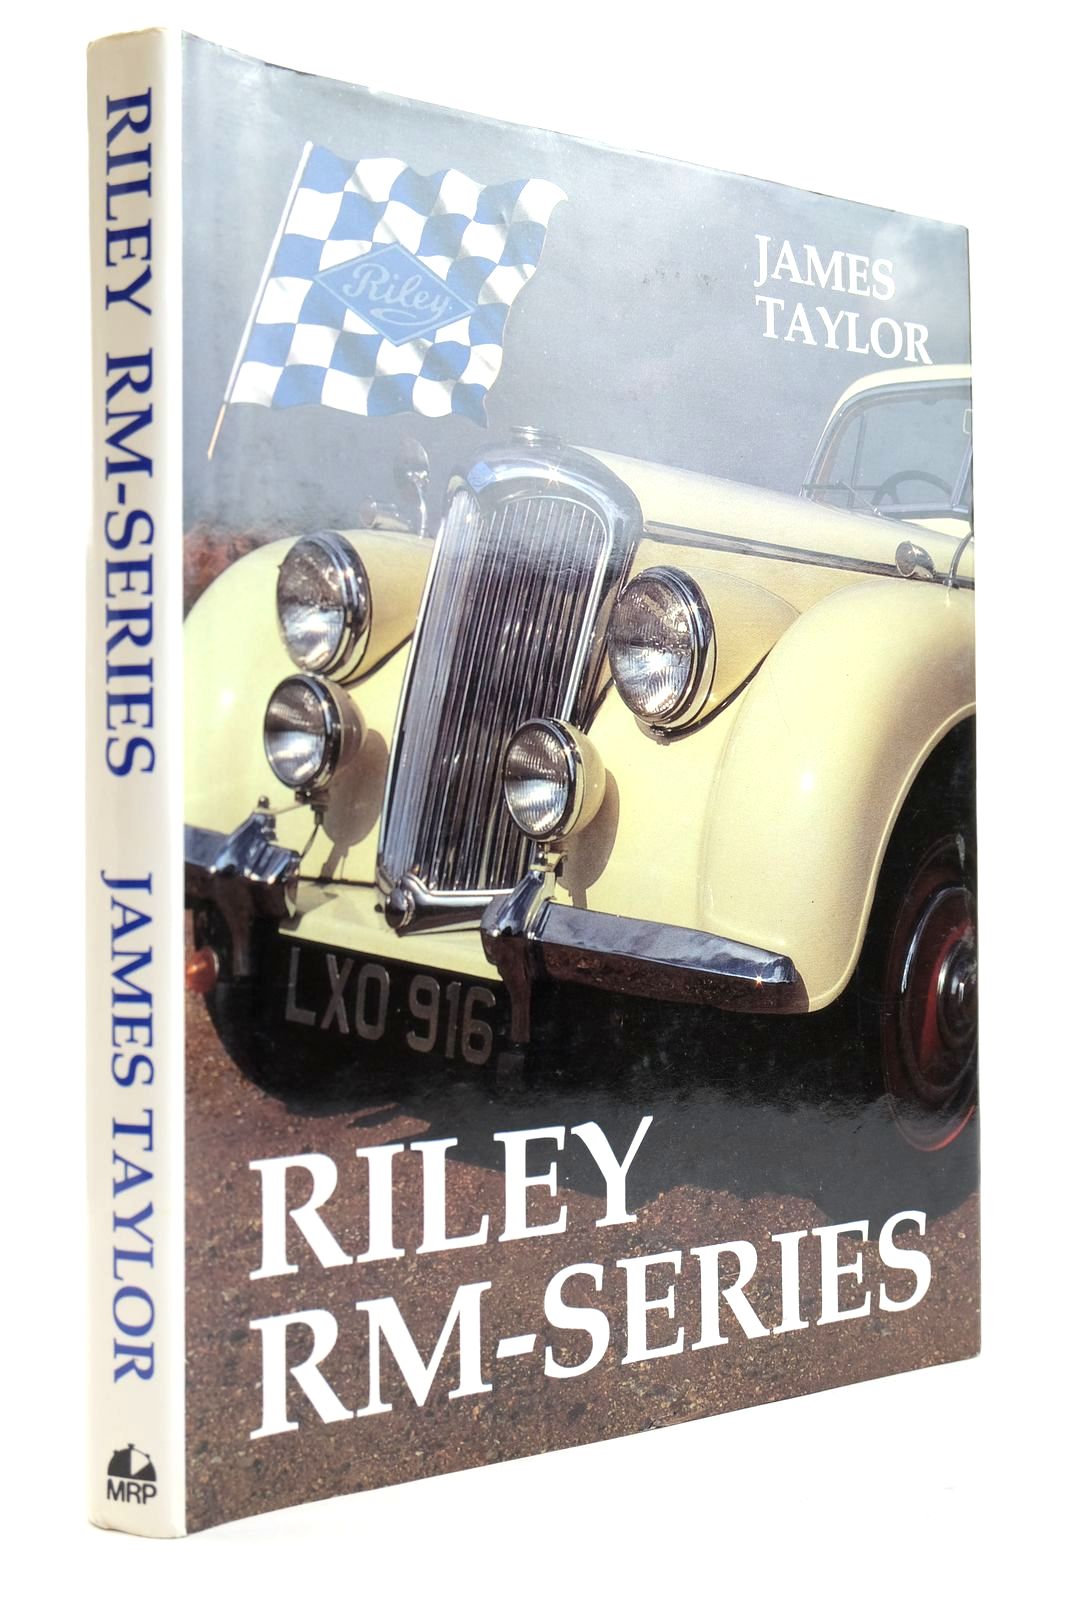 Photo of RILEY RM-SERIES written by Taylor, James published by Motor Racing Publications Ltd. (STOCK CODE: 2132558)  for sale by Stella & Rose's Books